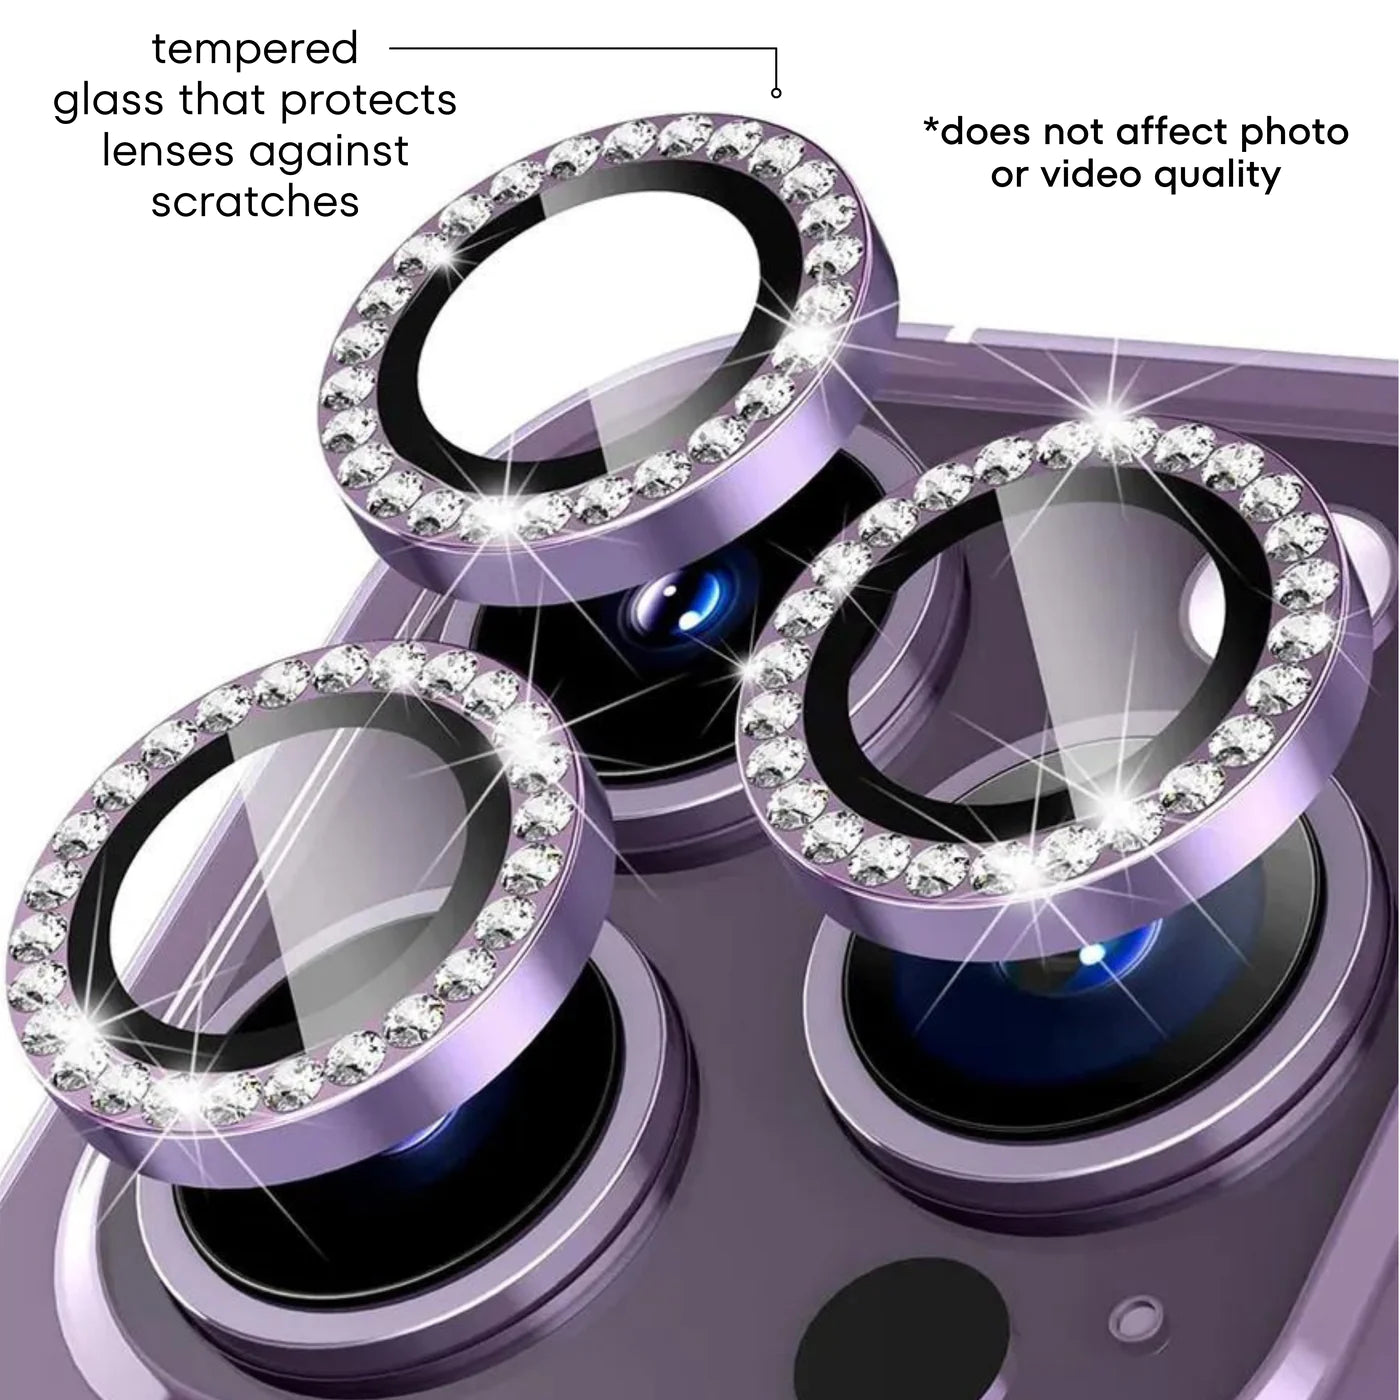 PHONE LENS PROTECTOR SILVER